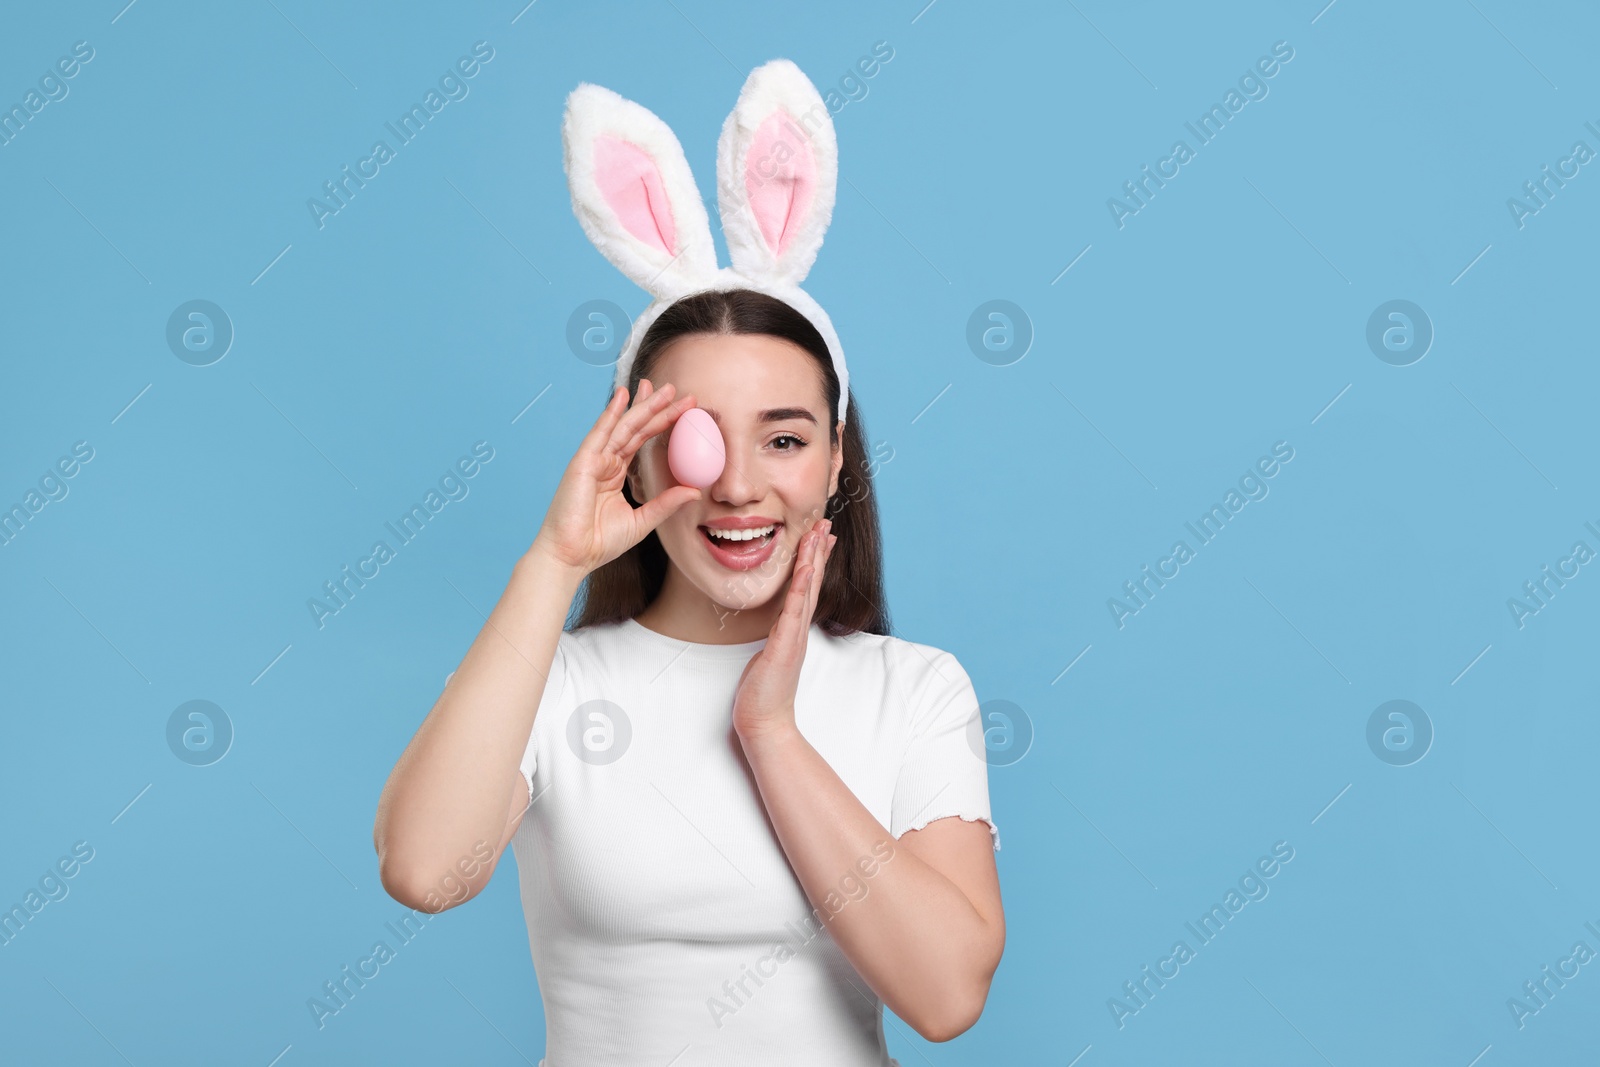 Photo of Happy woman in bunny ears headband holding painted Easter egg on turquoise background